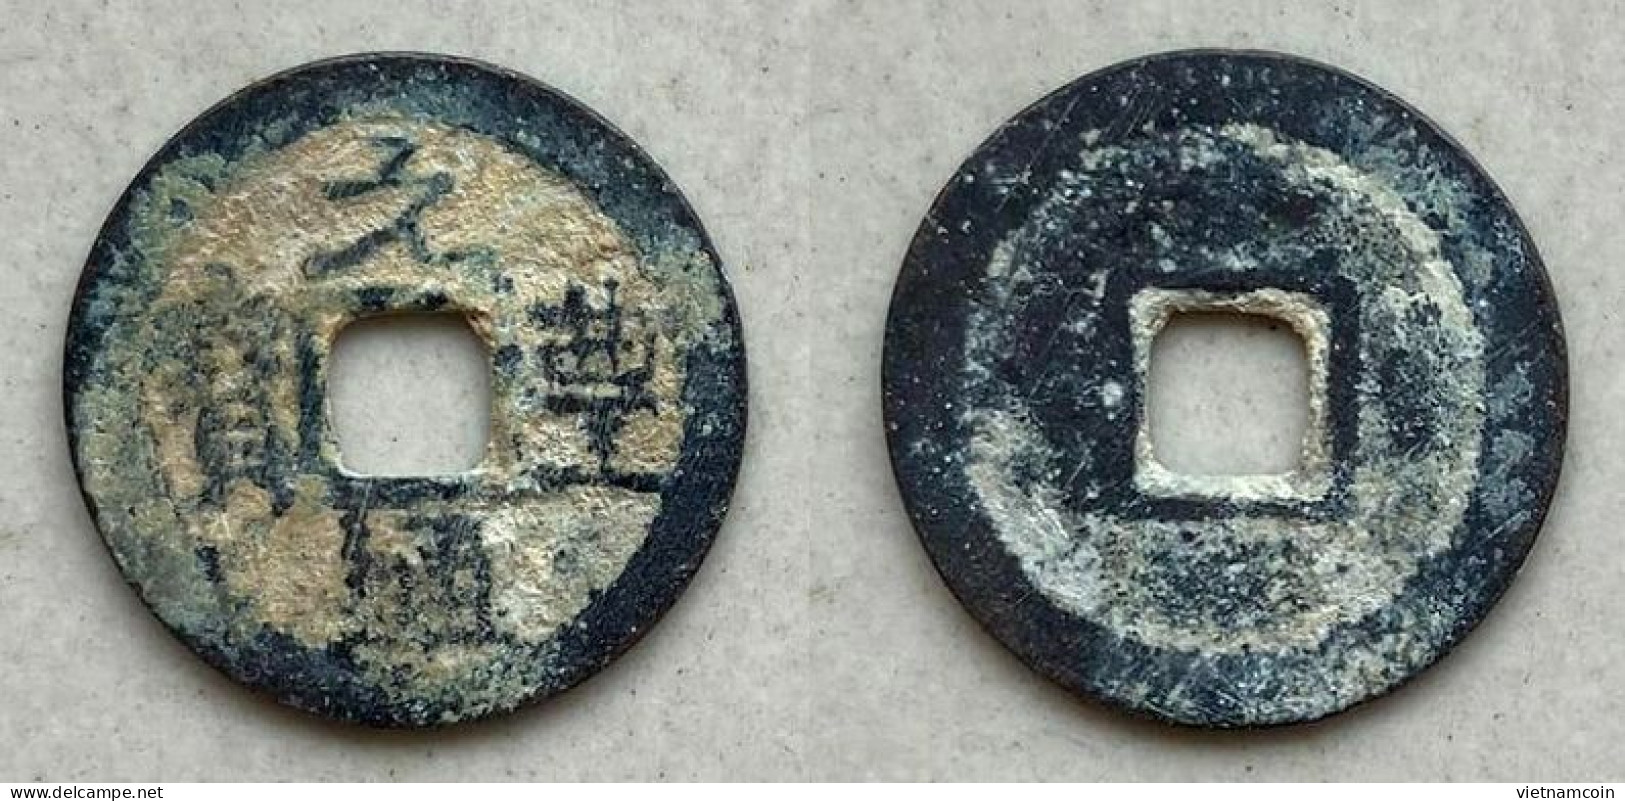 Ancient Annam Coin  Nguyen Phong Thong Bao ( Thieu Phu Group) - Red Copper - THE NGUYEN LORDS (1558-1778) - Vietnam